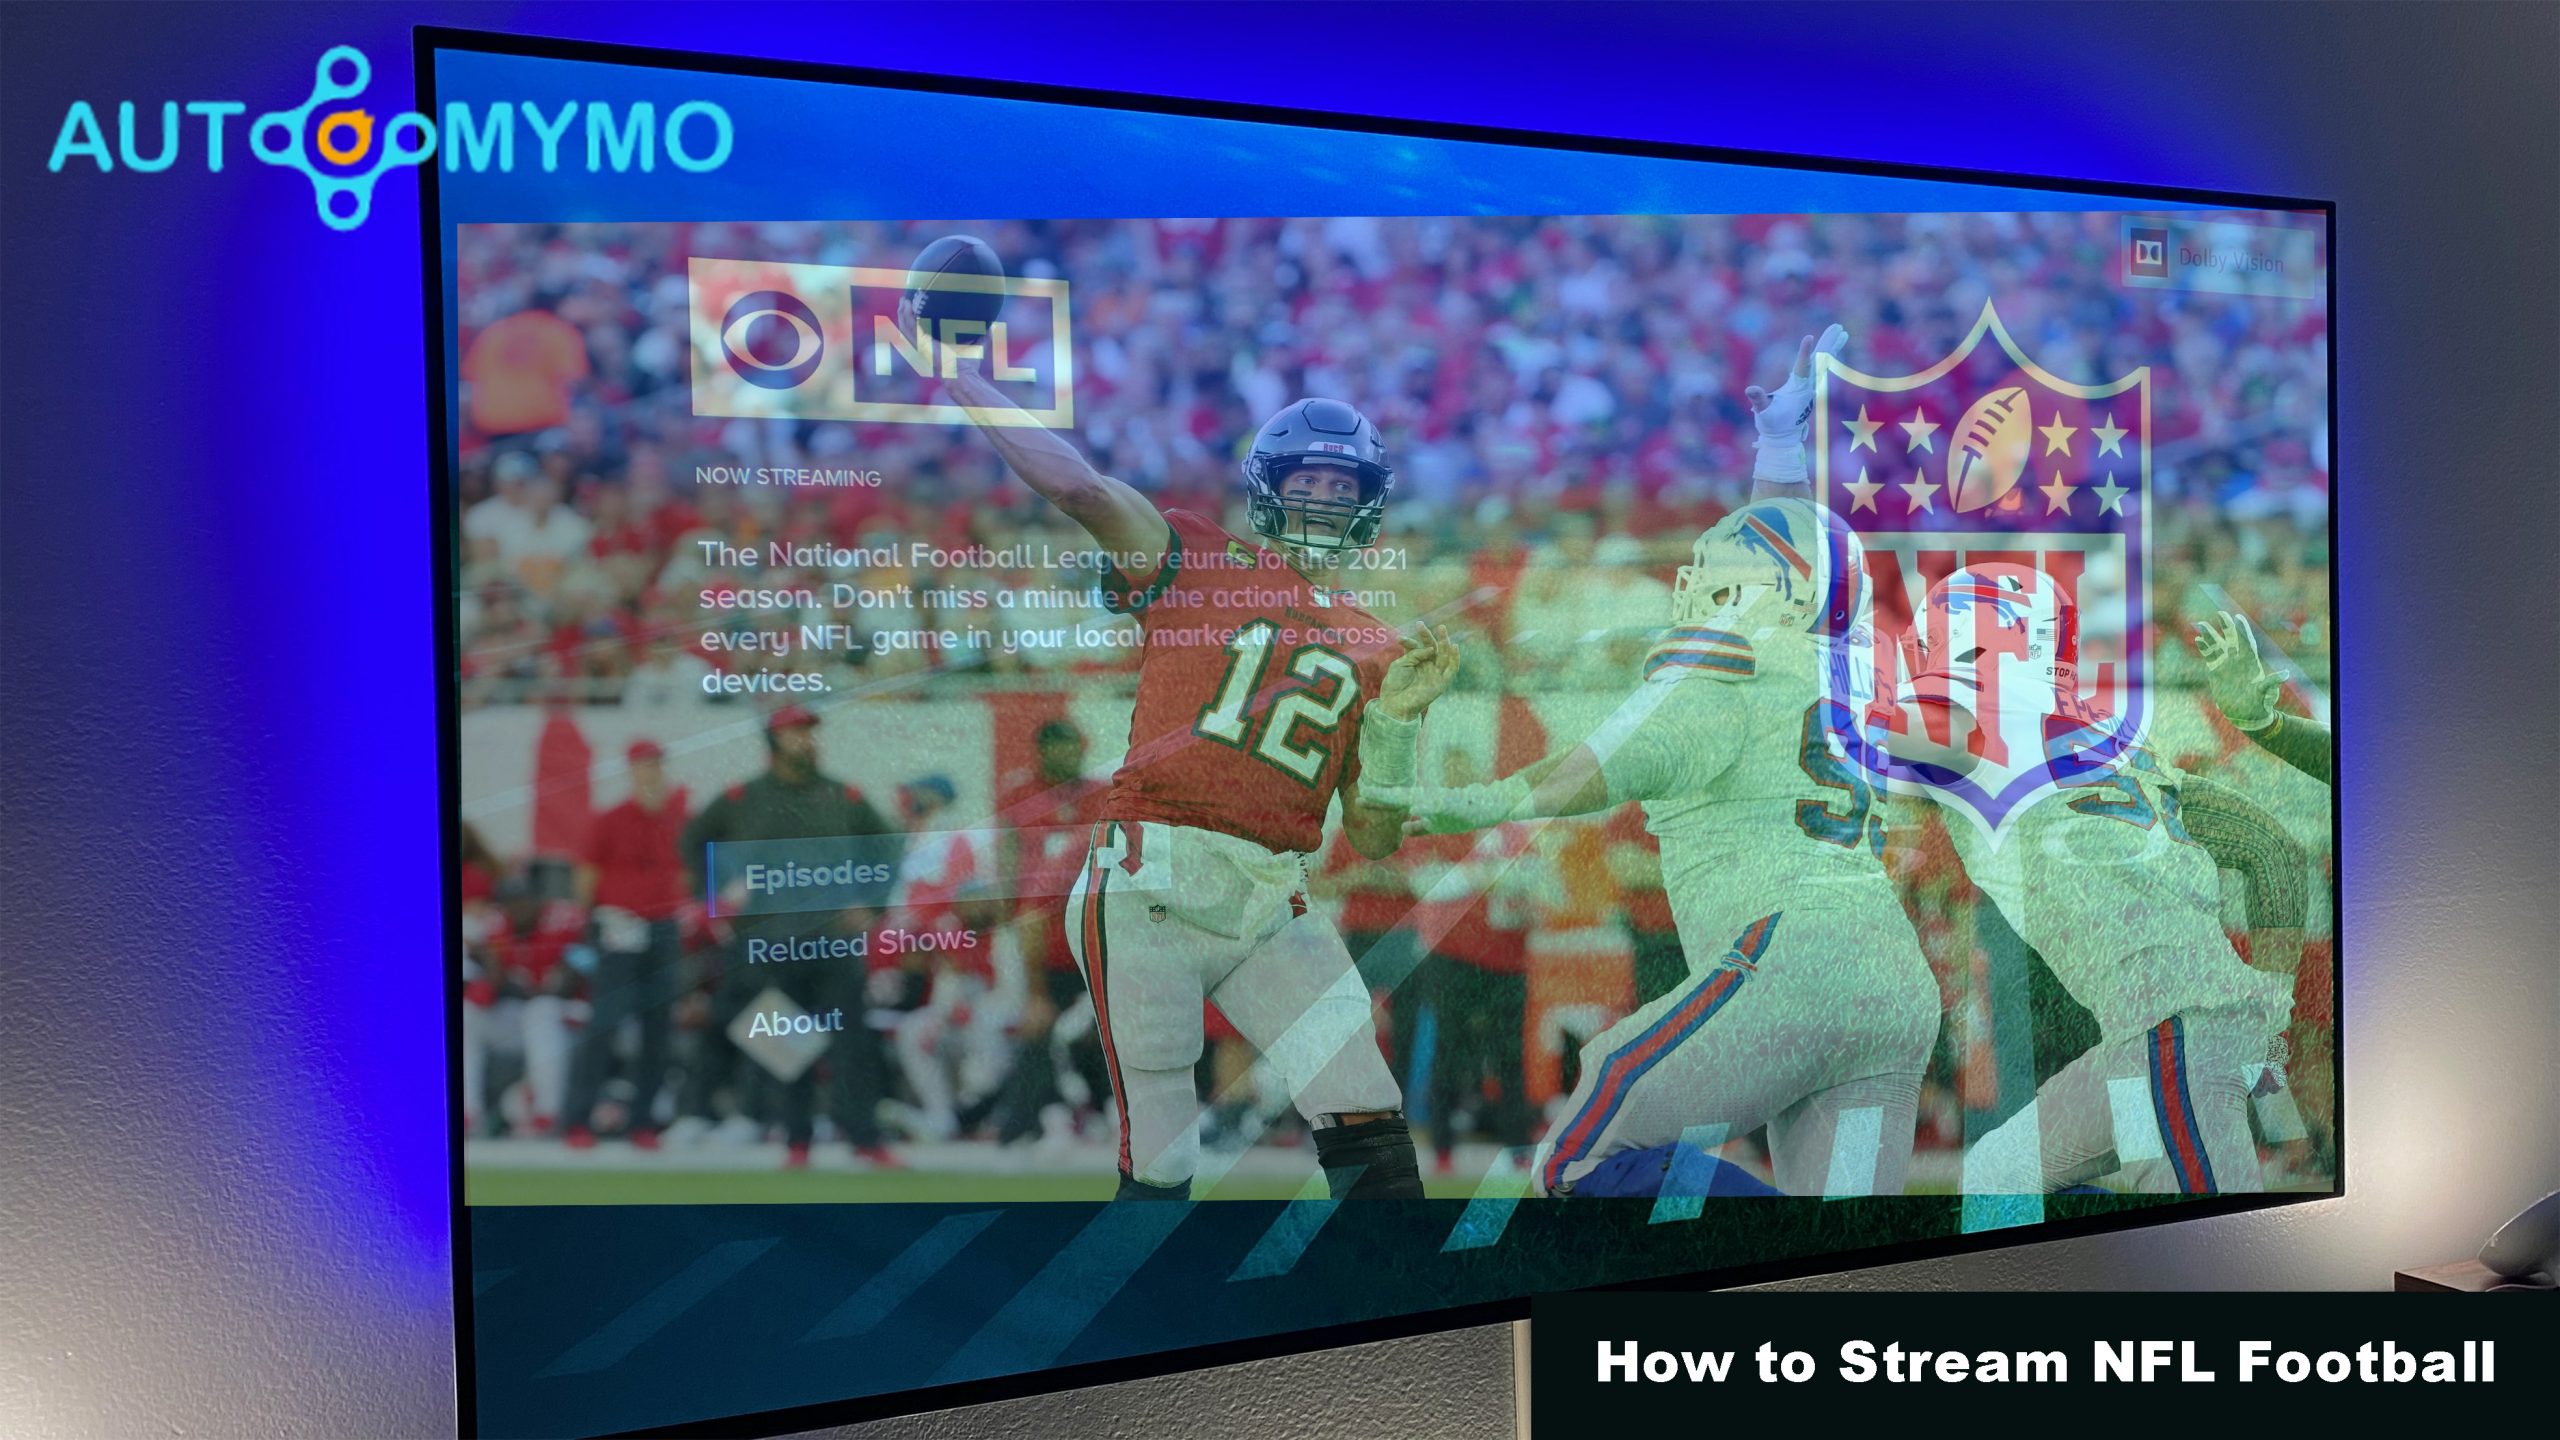 How to Stream NFL Football